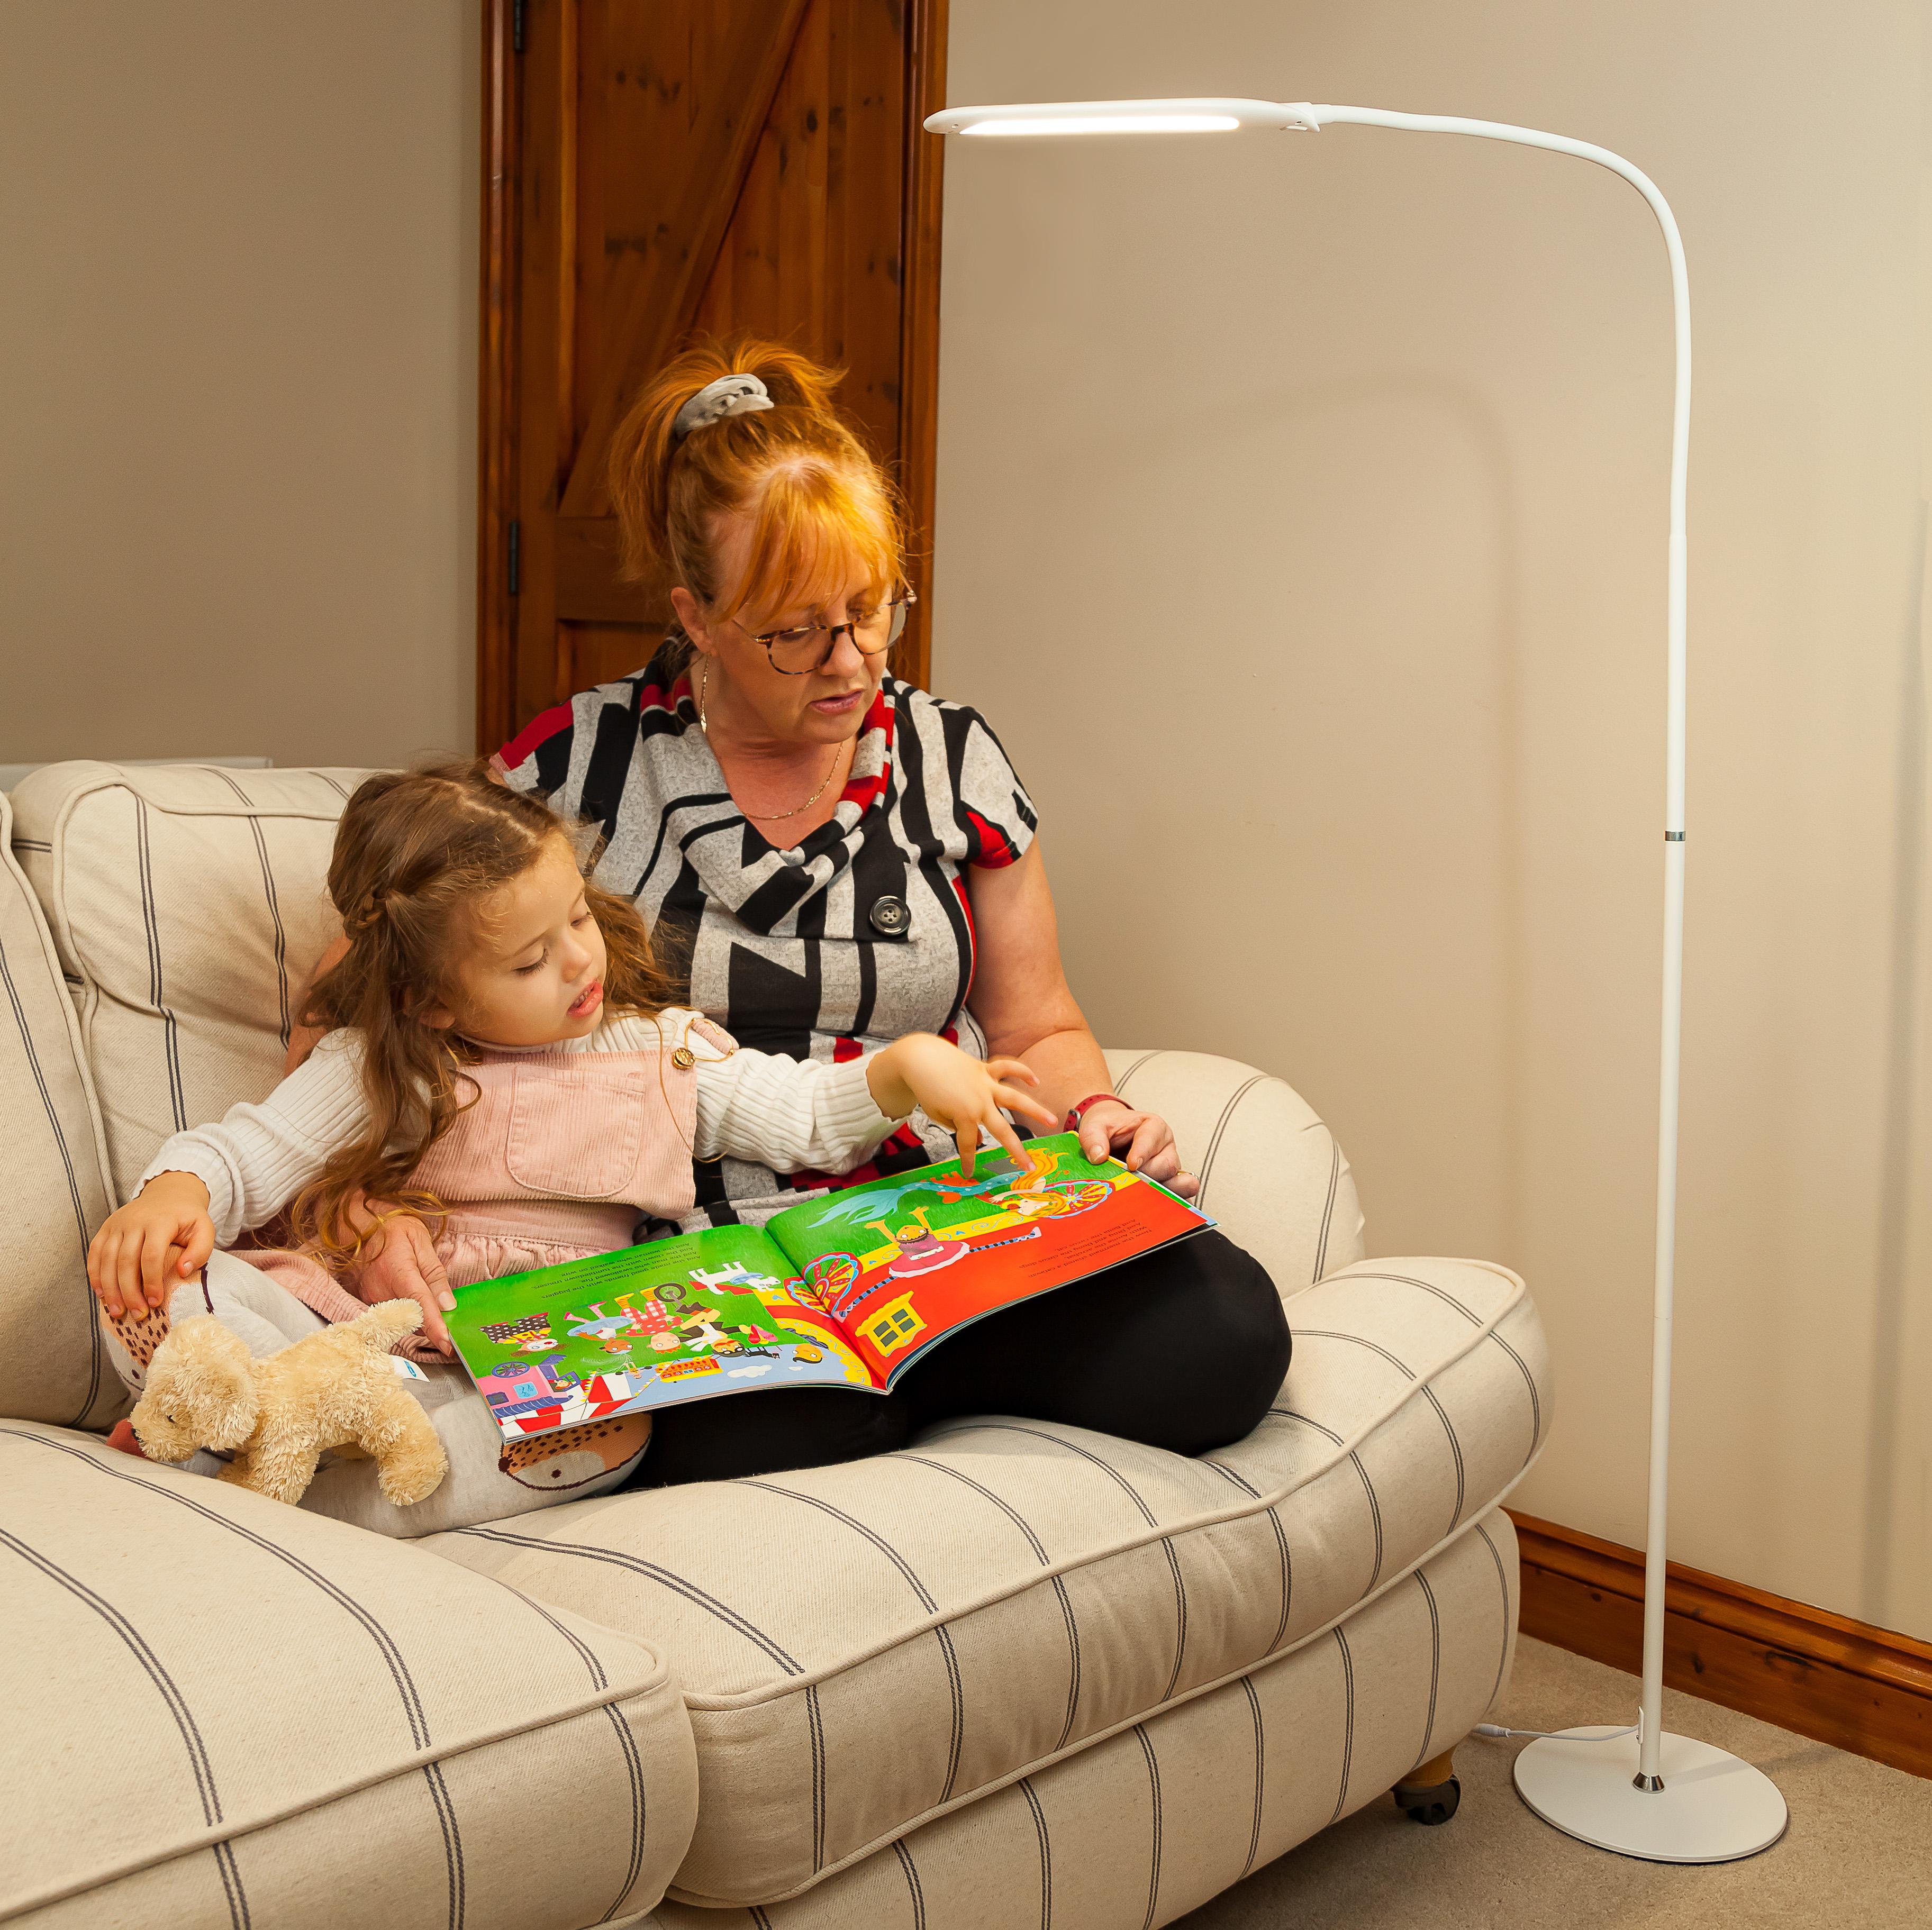 StandBright 2 Floor Standing Light shining over a mother and daughter reading a picture book together